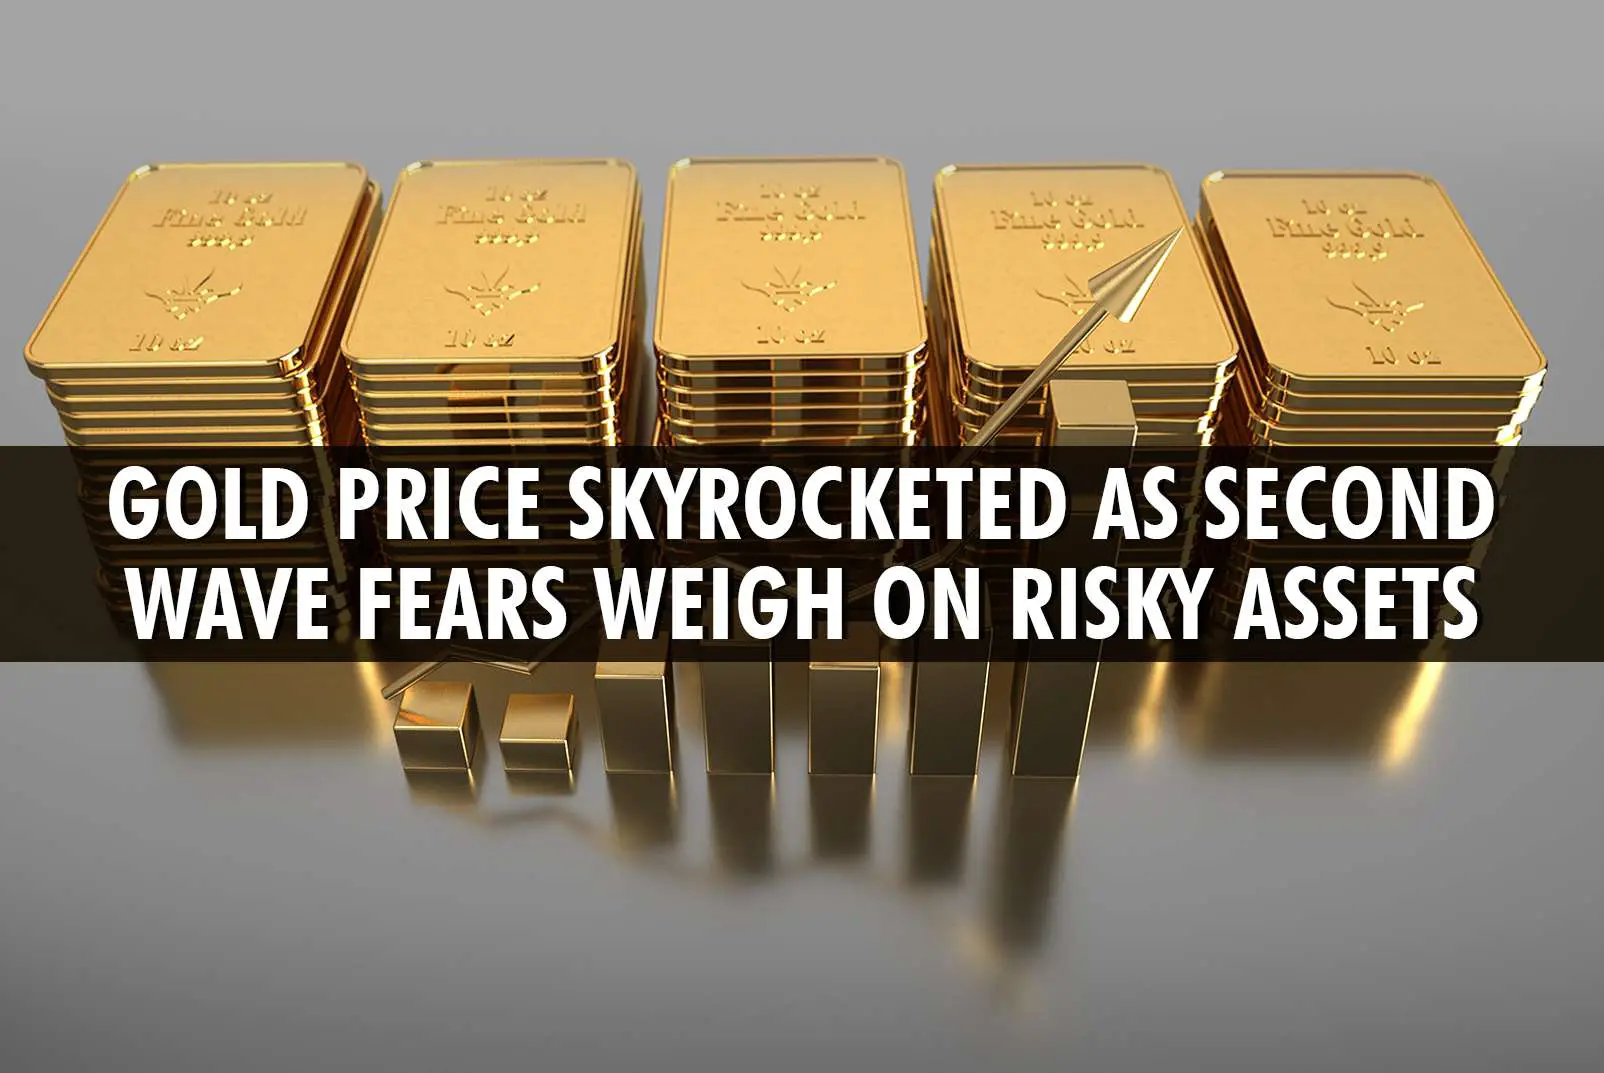 Gold price skyrocketed as second wave fears weigh on risky assets ...